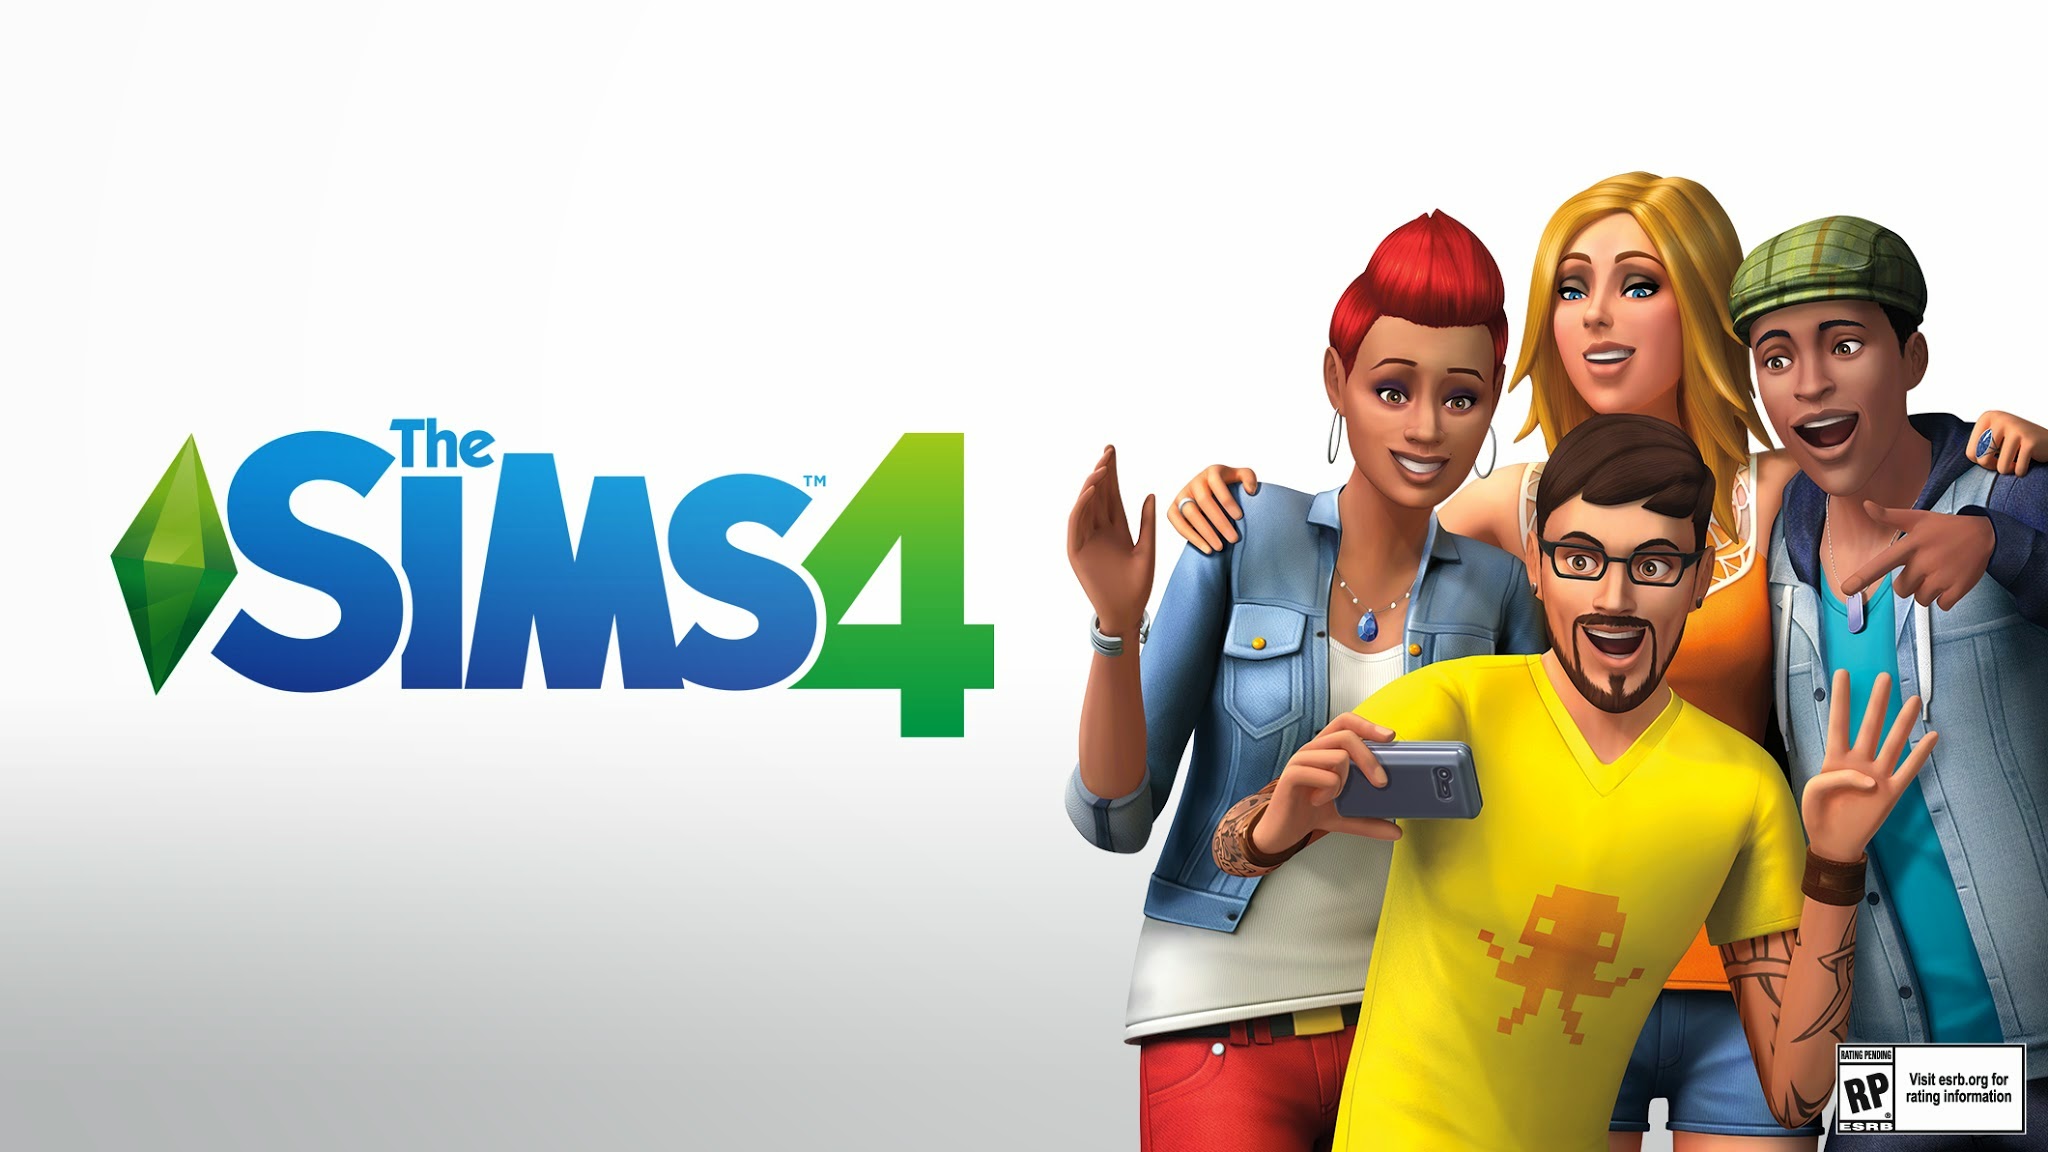 free download sims 3 pc